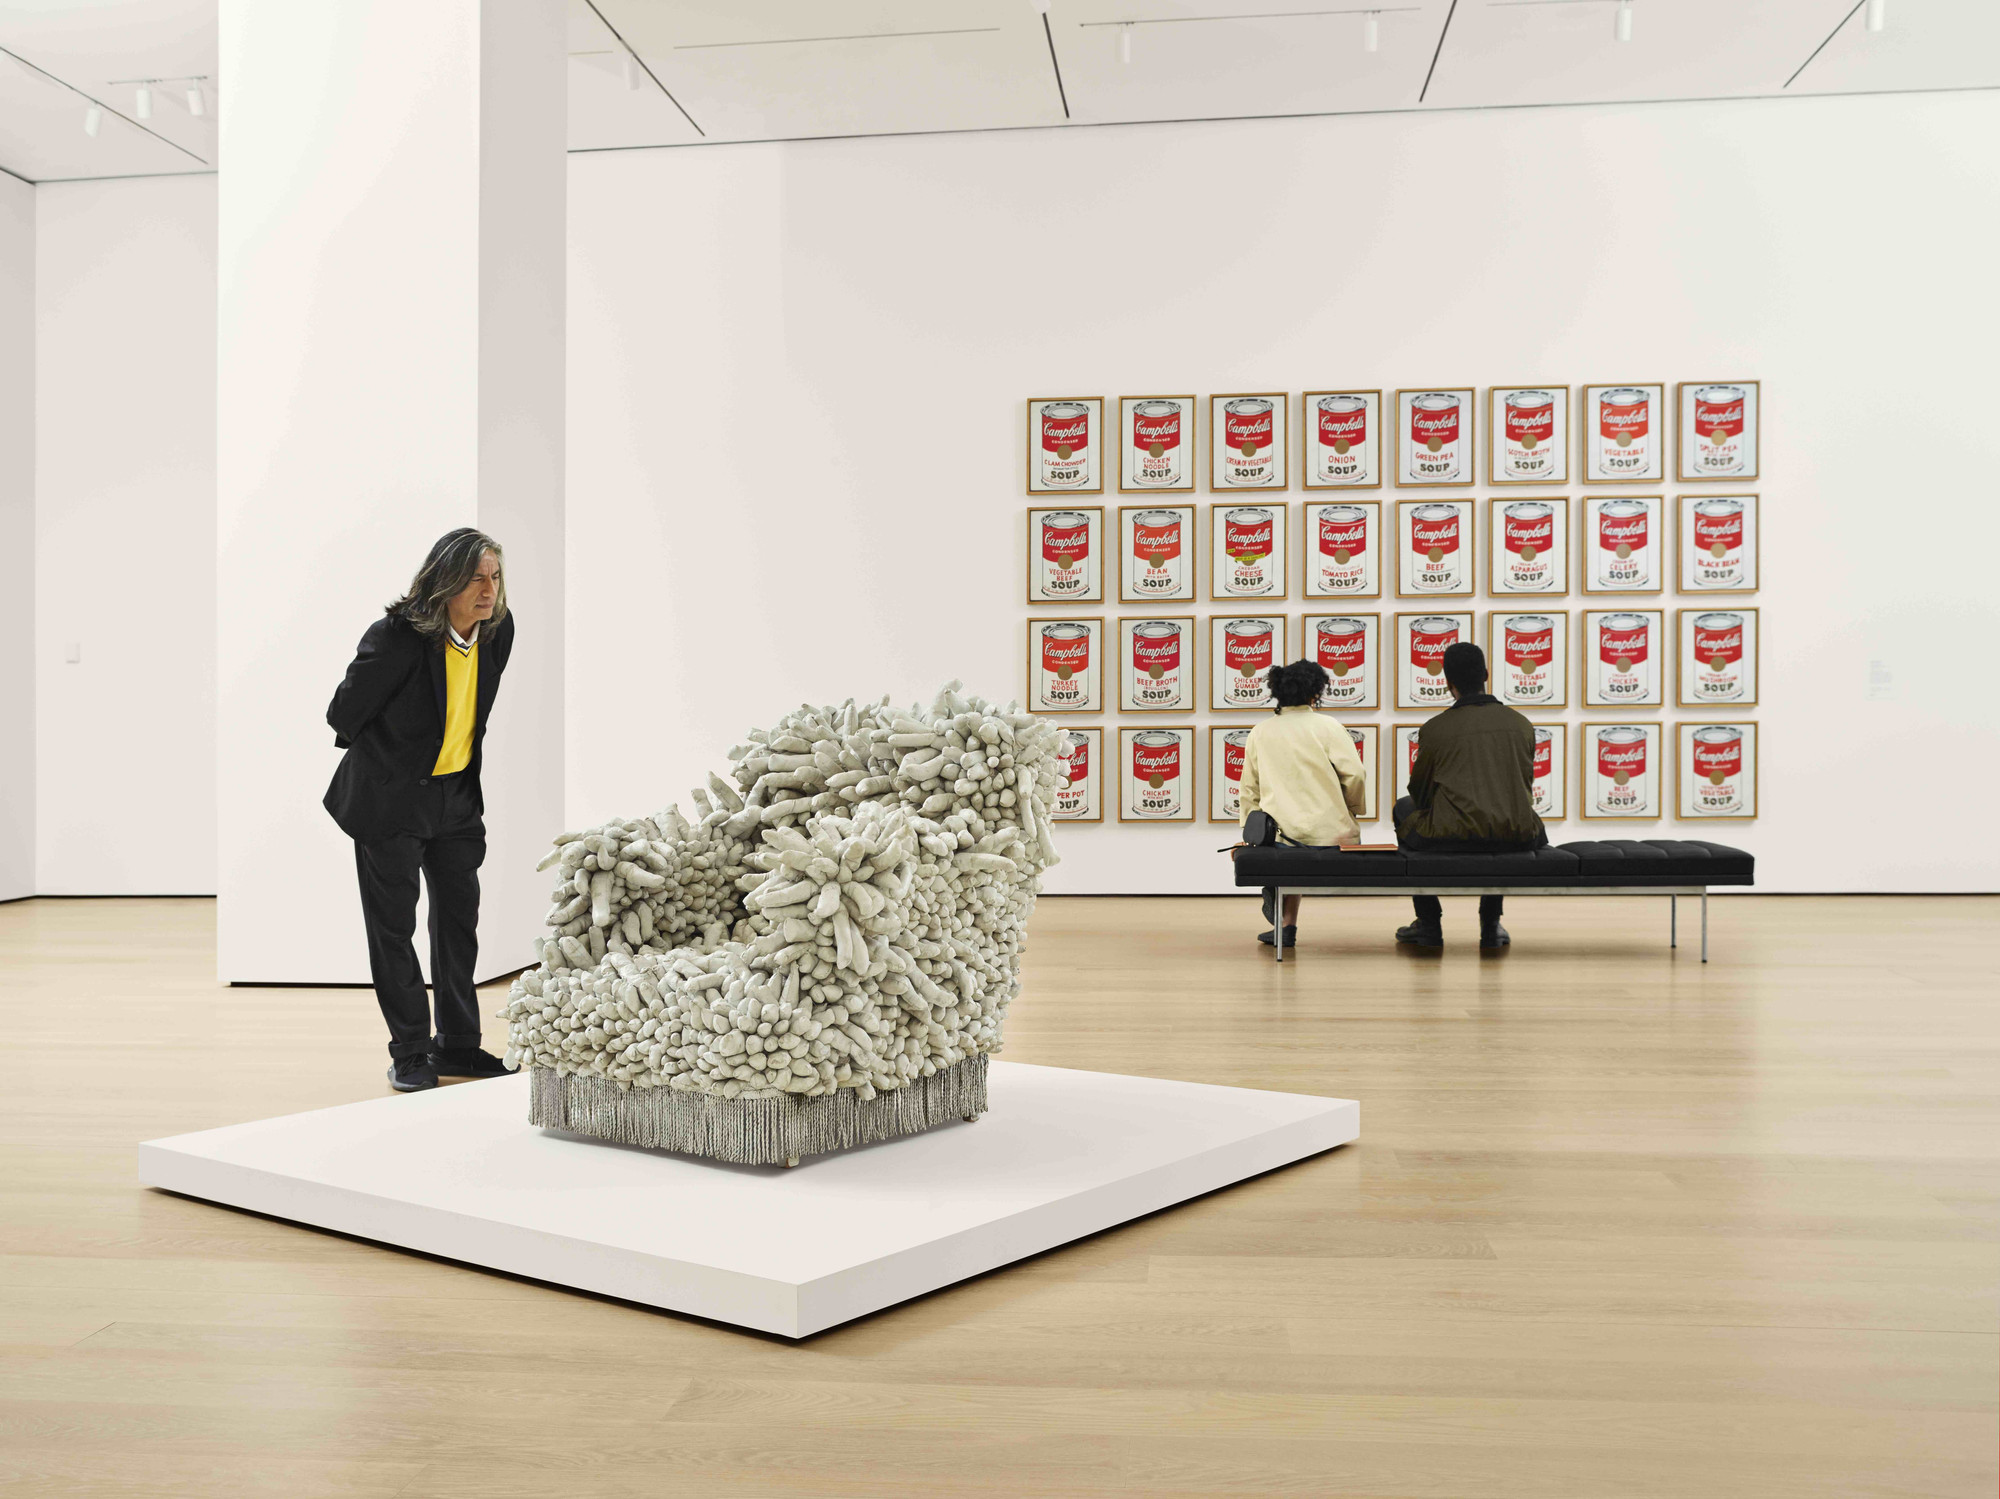 A view of the fourth-floor collection galleries. Shown (from left): Yayoi Kusama. Accumulation No. 1. 1962. Sewn stuffed fabric, paint, and chair fringe. Gift of William B. Jaffe and Evelyn A. J. Hall (by exchange). © 2019 Yayoi Kusama; Andy Warhol. Campbell’s Soup Cans. 1962. Acrylic with metallic enamel paint on canvas, 32 panels. Partial gift of Irving Blum Additional funding provided by Nelson A. Rockefeller Bequest, gift of Mr. and Mrs. William A. M. Burden, Abby Aldrich Rockefeller Fund, gift of Nina and Gordon Bunshaft, acquired through the Lillie P. Bliss Bequest, Philip Johnson Fund, Frances R. Keech Bequest, gift of Mrs. Bliss Parkinson, and Florence B. Wesley Bequest (all by exchange). © 2019 Andy Warhol Foundation/ARS, NY/TM Licensed by Campbell’s Soup Co. All rights reserved. Photo: Noah Kalina